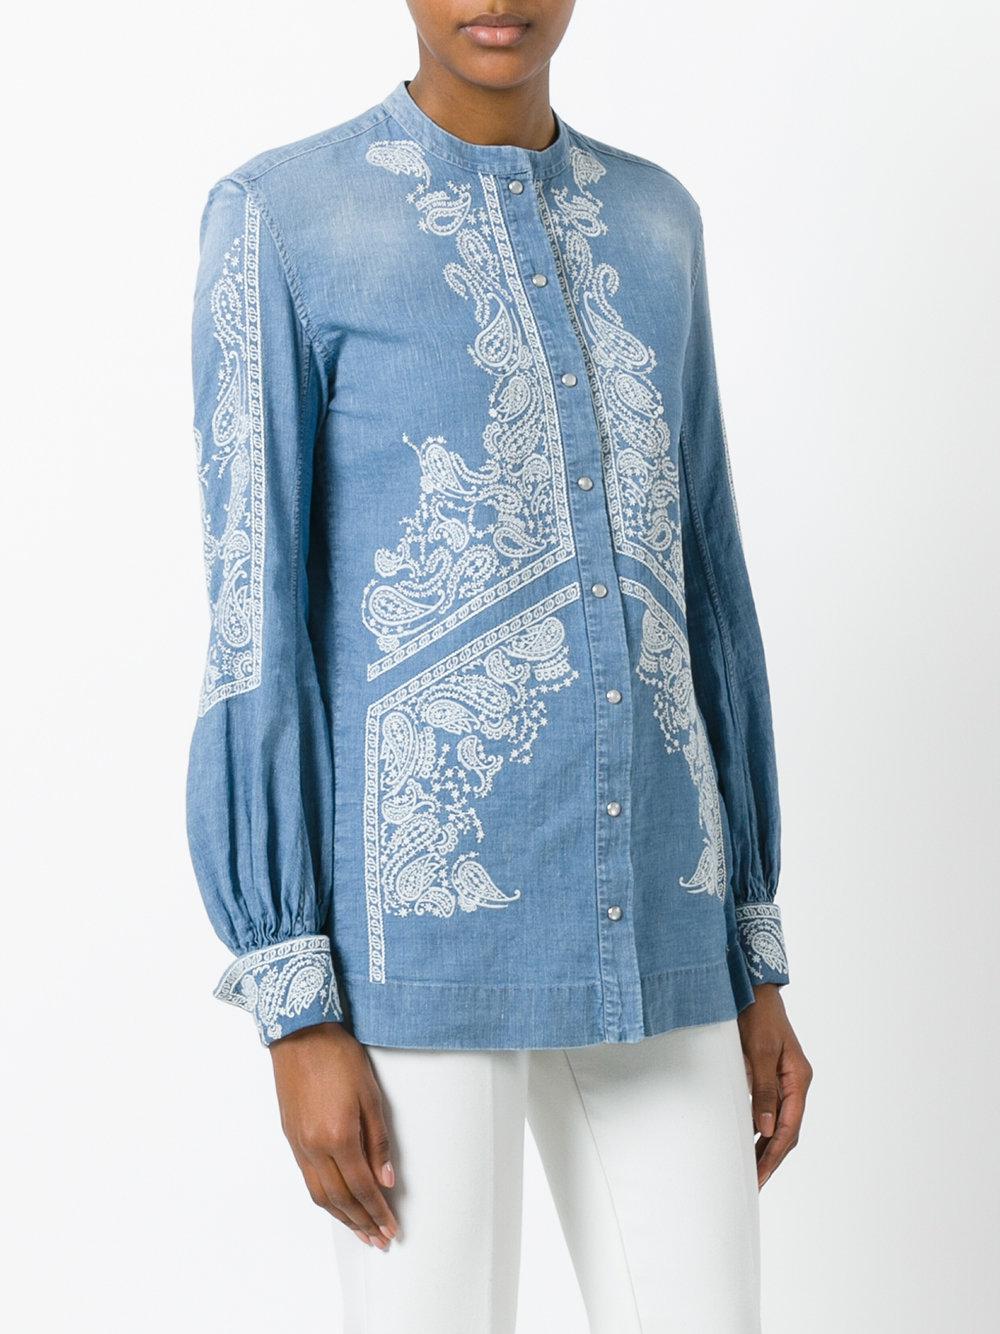 Lyst - Ermanno Scervino Embroidered Billow Sleeve Top in Blue